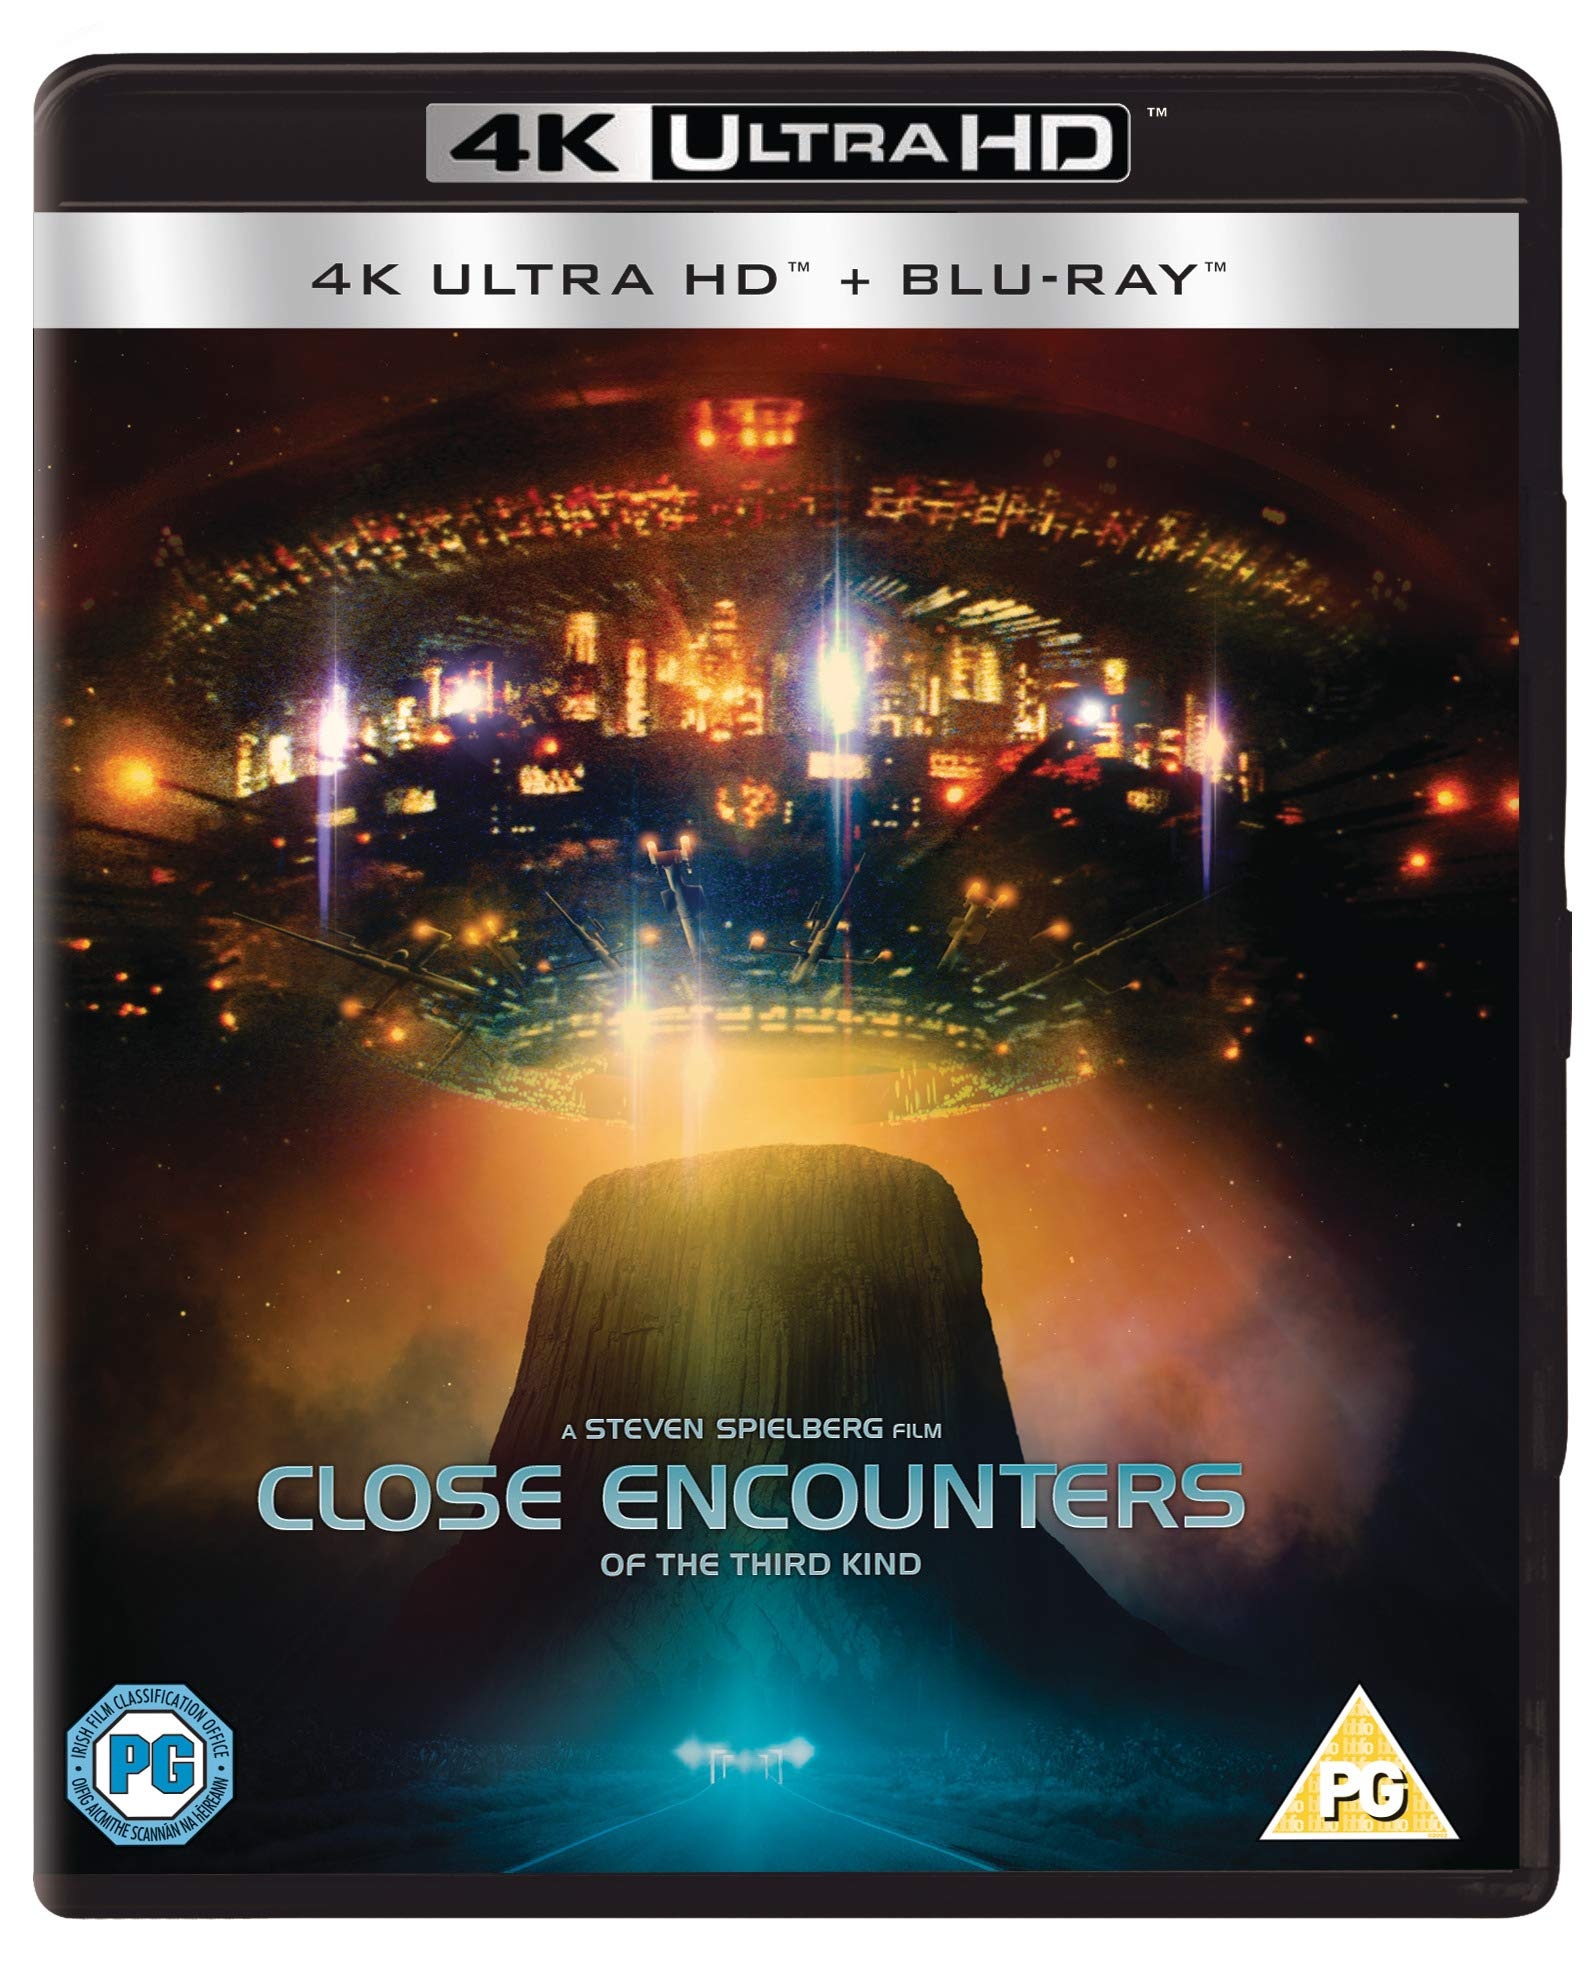 Close Encounters of the Third Kind (Director's Cut) [4K Ultra-HD + Blu-Ray] [UK Import]